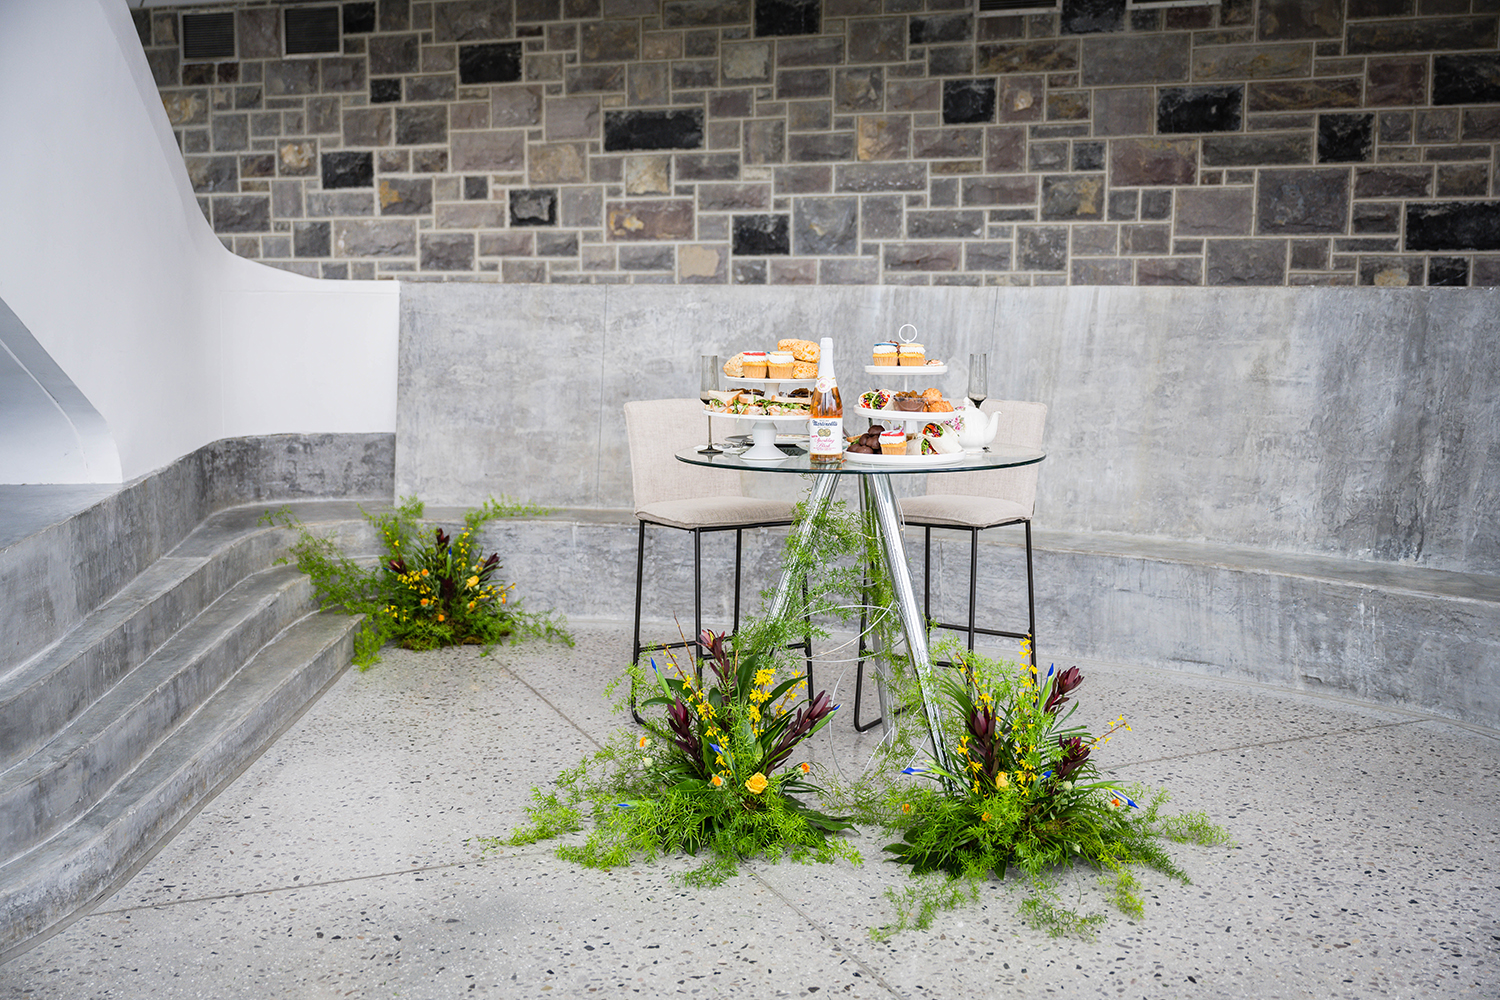 A tall, clear, glass table features two tea trays full of Star-Trek inspired food and a tea set, with florals placed under the table near the legs. Two tall chairs sit empty behind the table. Another floral arrangement is placed behind the table against a wall.